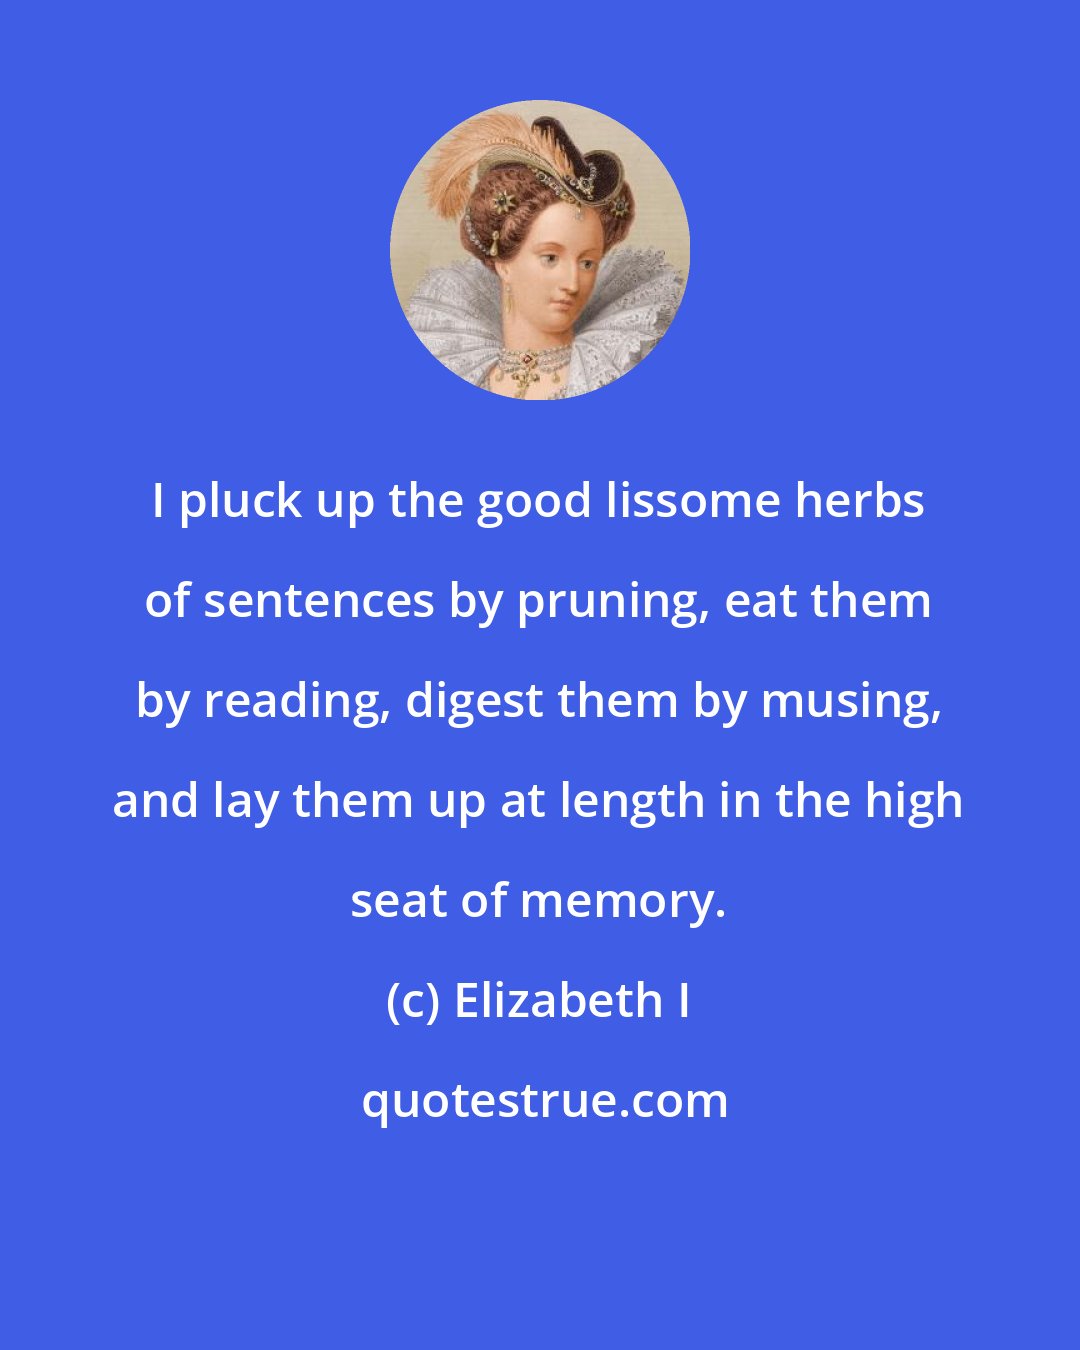 Elizabeth I: I pluck up the good lissome herbs of sentences by pruning, eat them by reading, digest them by musing, and lay them up at length in the high seat of memory.